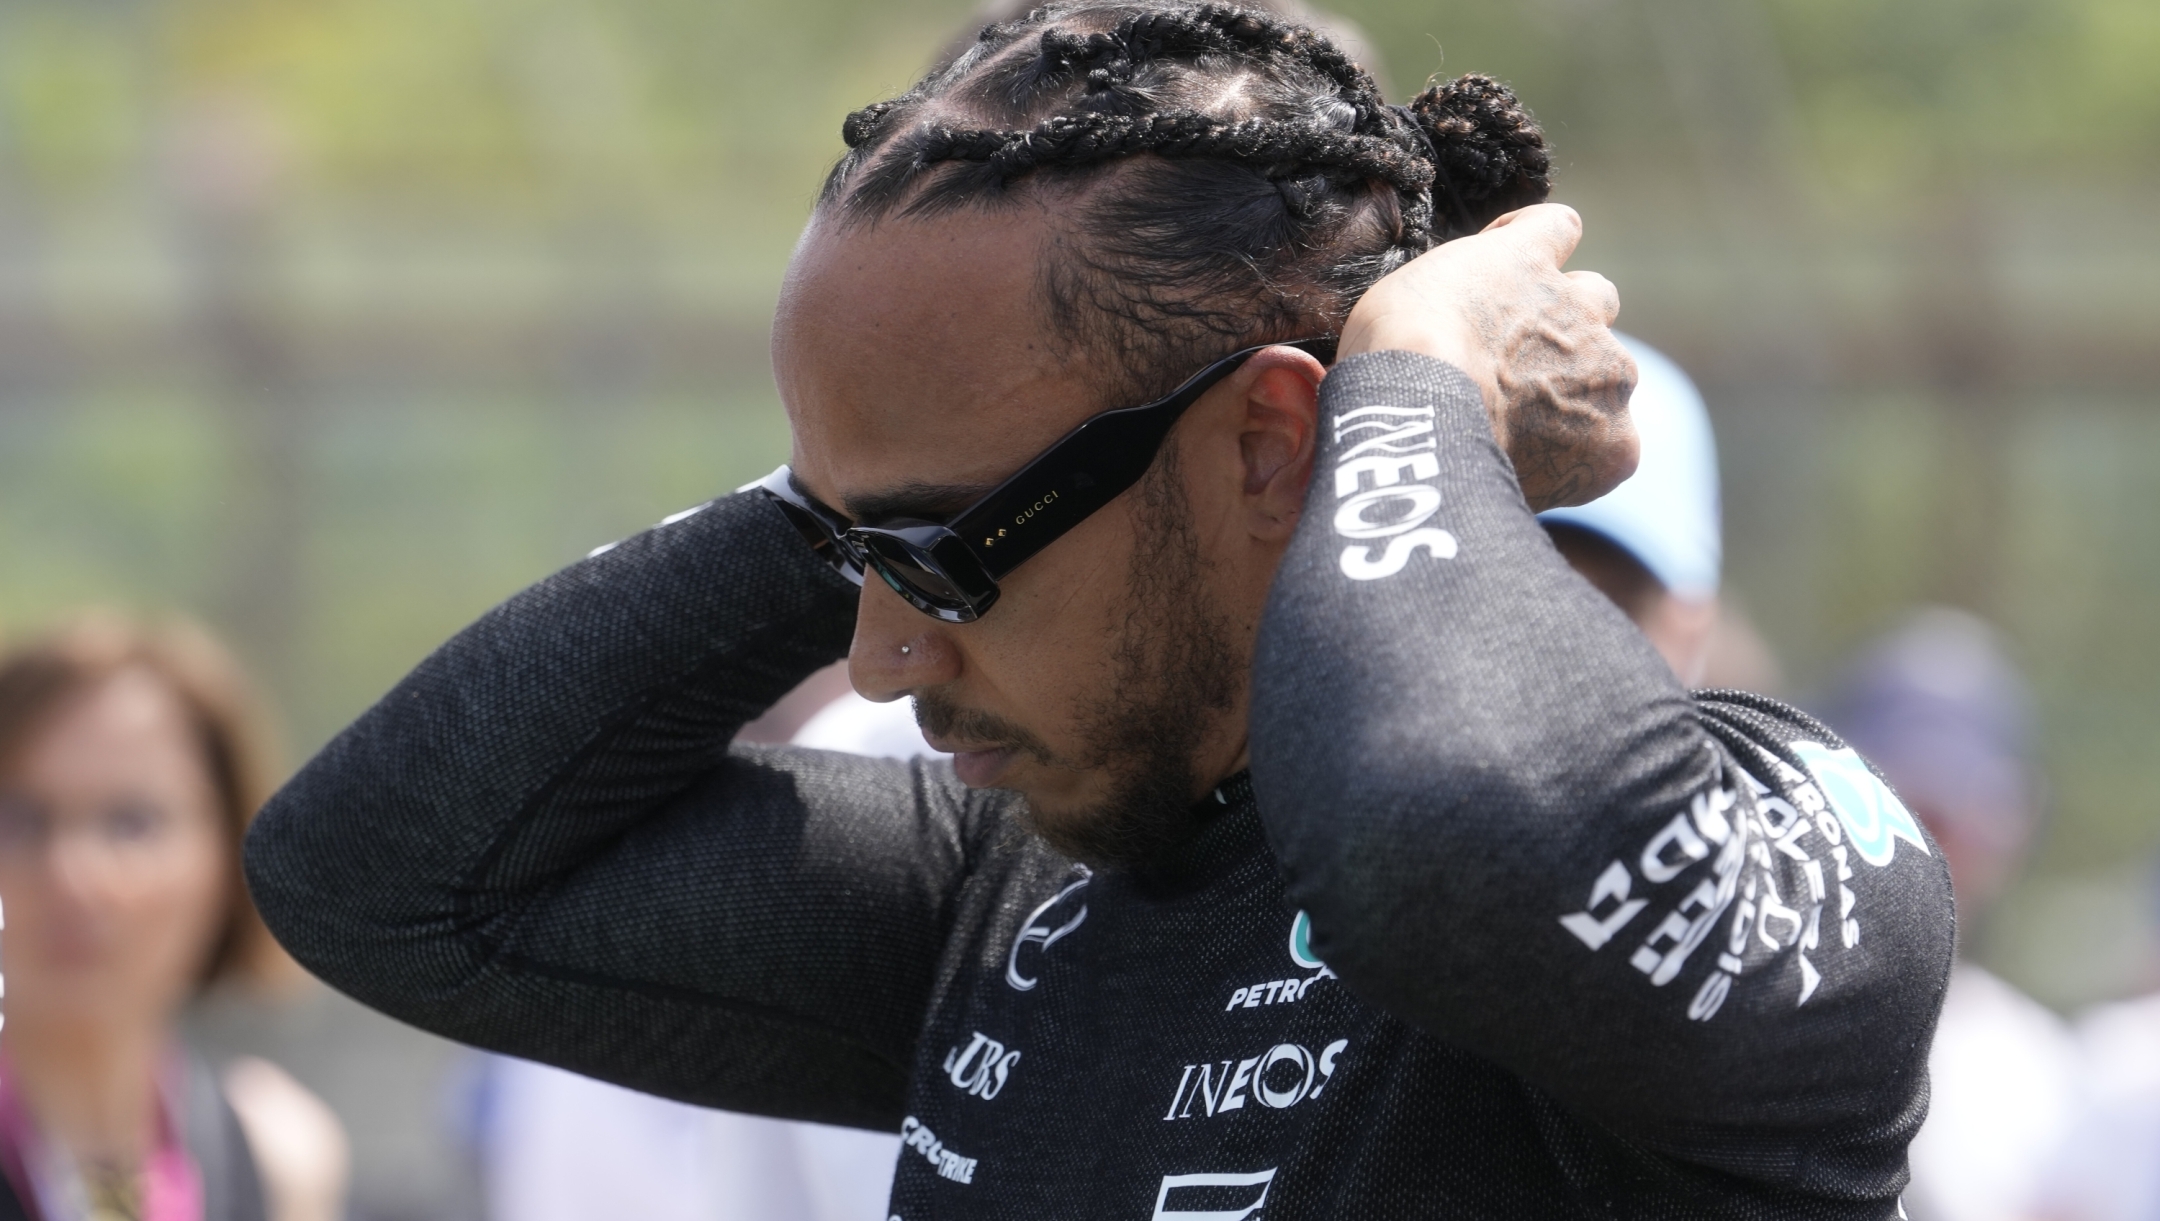 Mercedes driver Lewis Hamilton of Britain is on the starting grid before the Italy's Emilia Romagna Formula One Grand Prix race at the Dino and Enzo Ferrari racetrack in Imola, Italy, Sunday, May 19, 2024. (AP Photo/Luca Bruno, Pool)